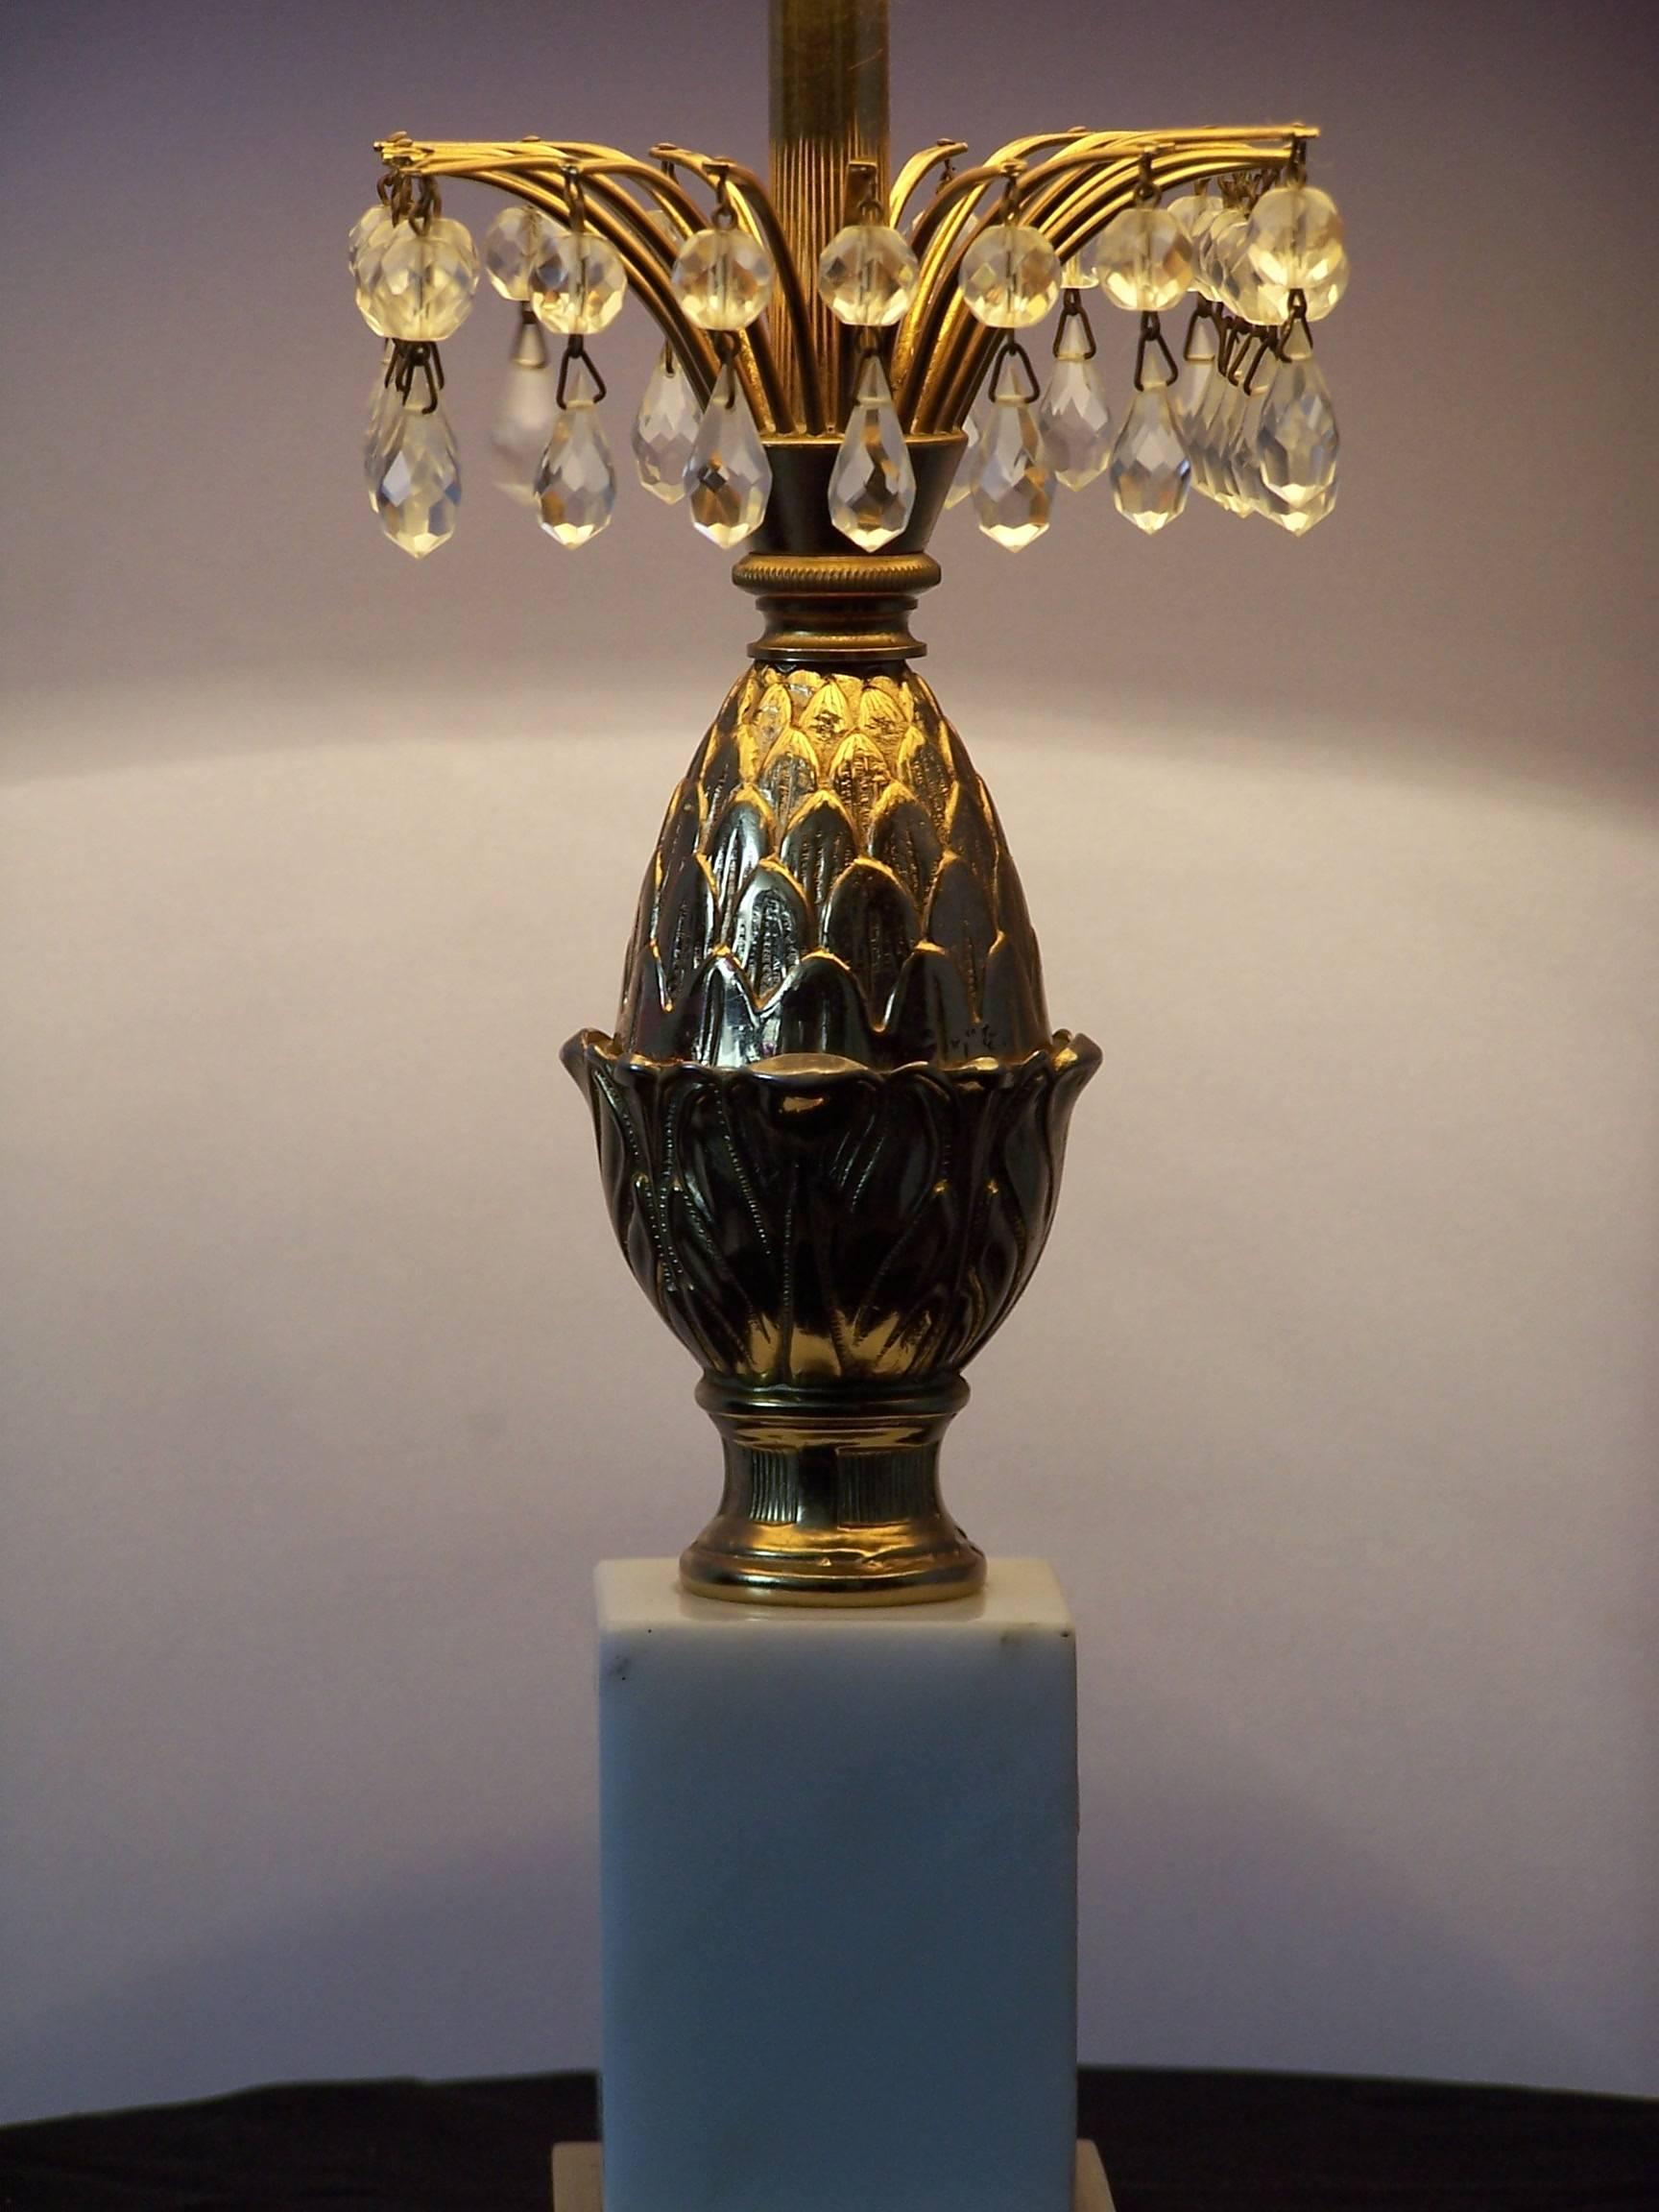 This pineapple table lamp features a Carrara marble base and glass pendants.